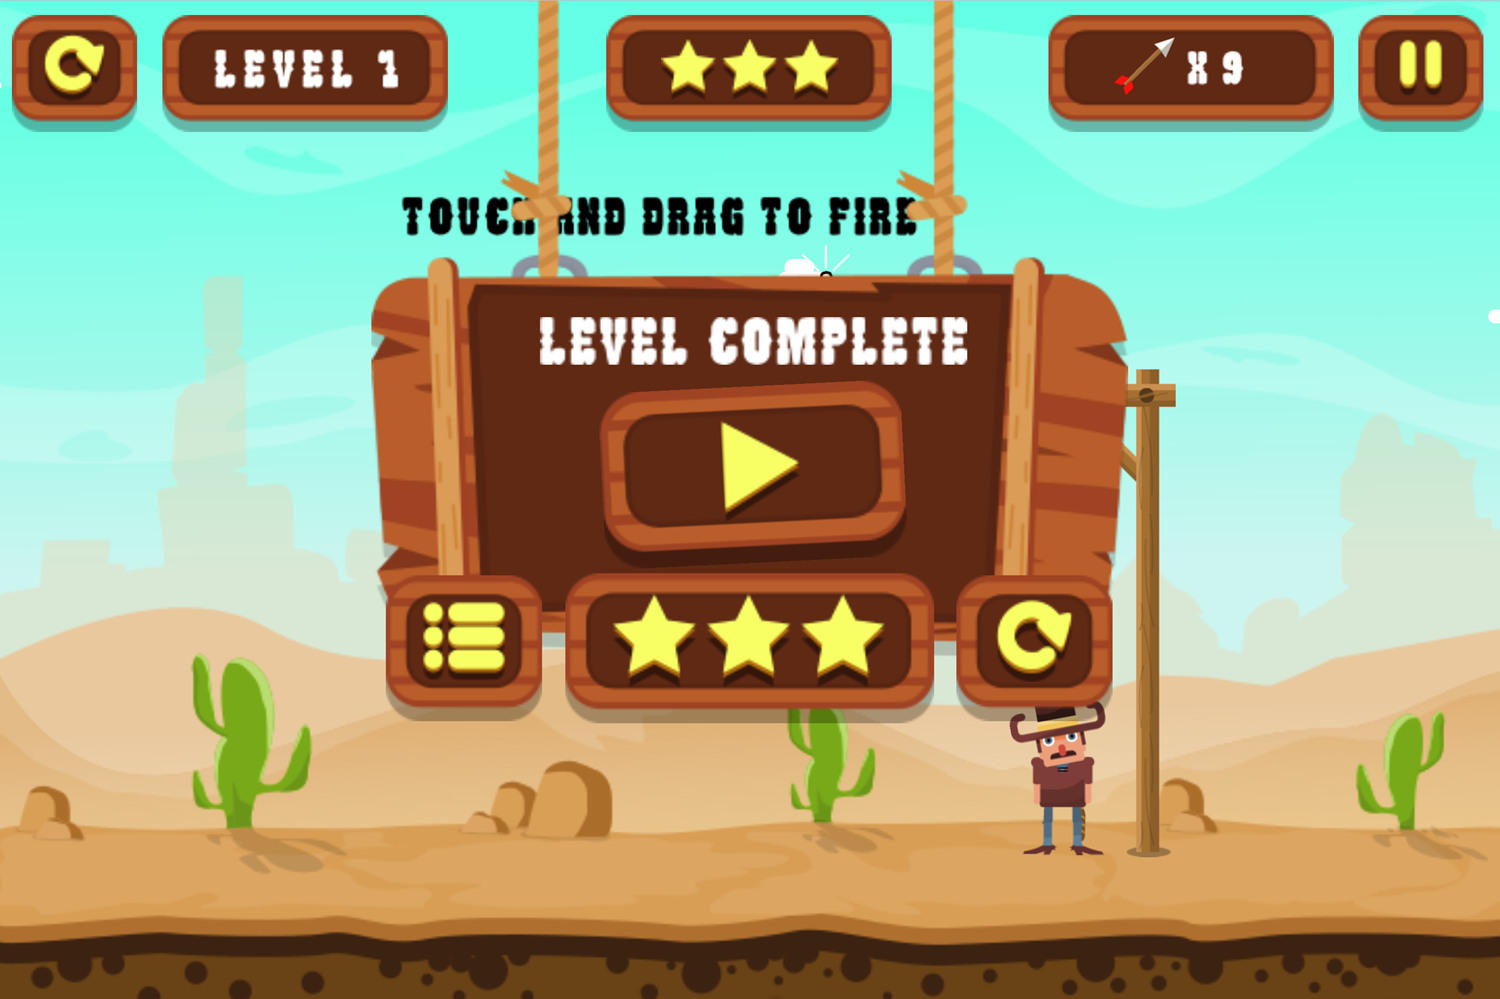 Save the Cowboy 2 Game Level Complete Screen Screenshot.